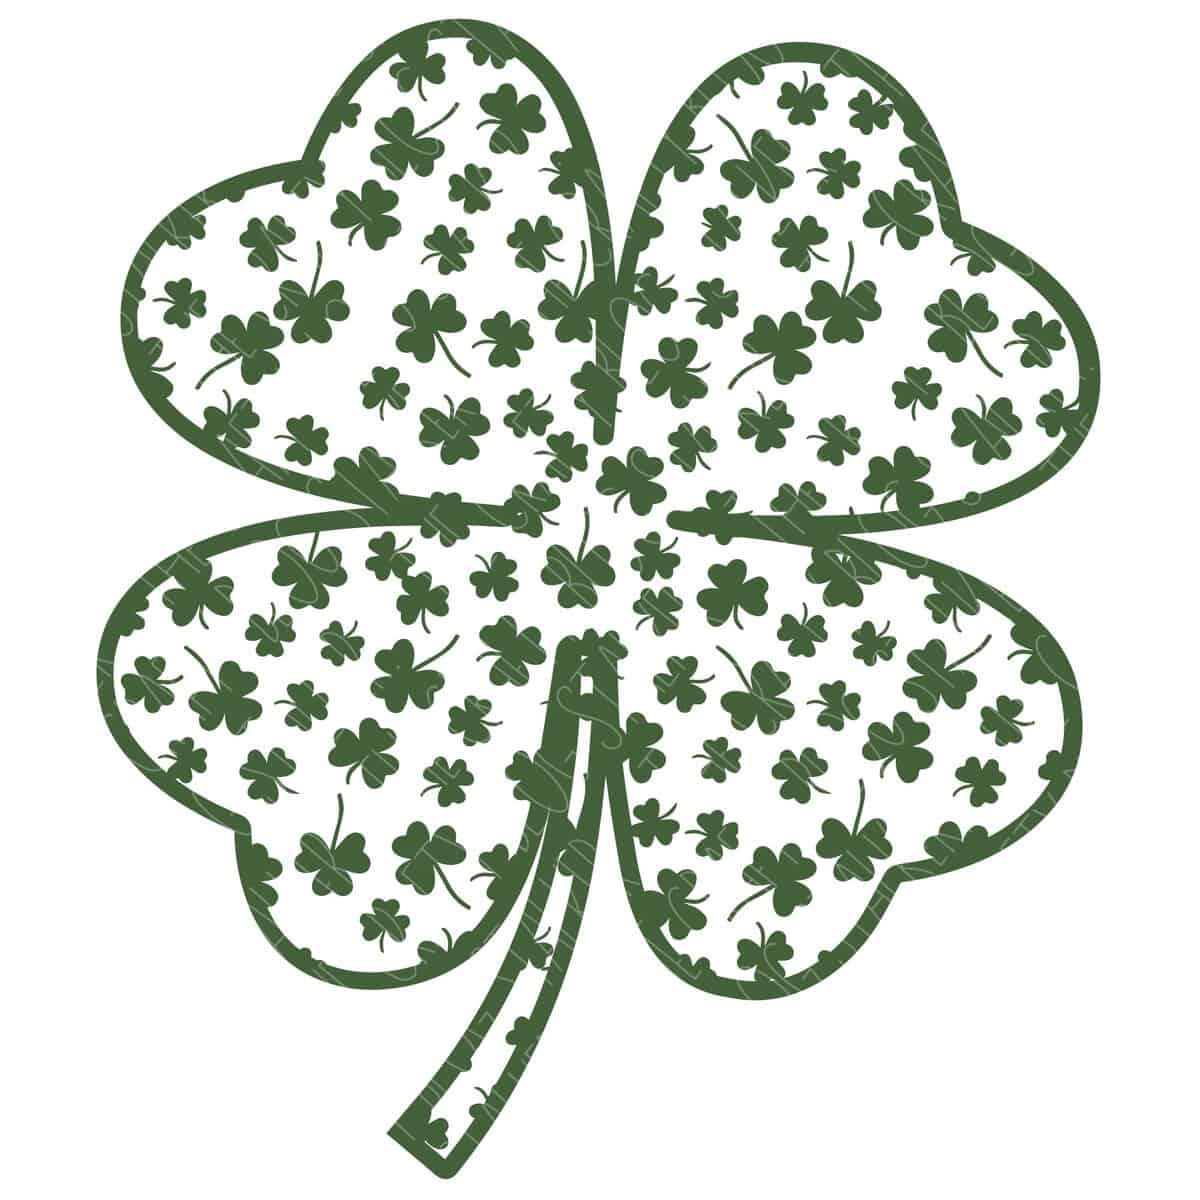 Shamrock Earring, St Patrick's Day Graphic by Artisan Craft SVG